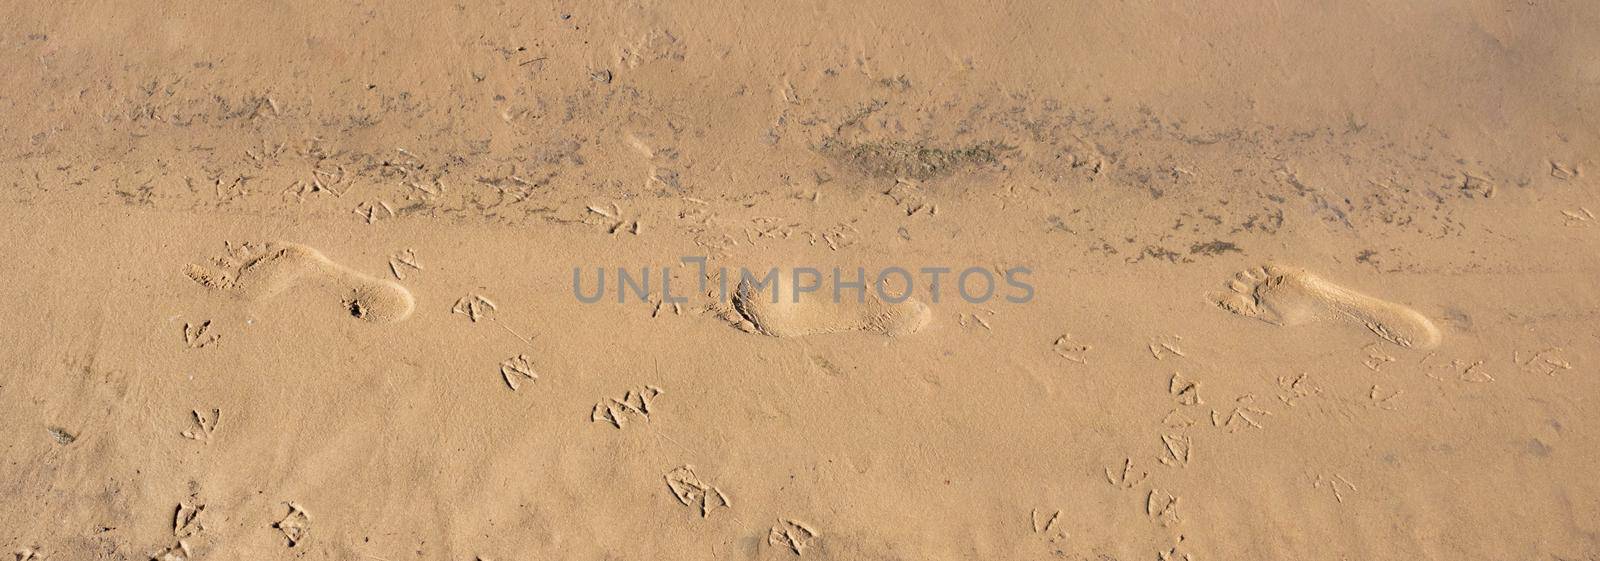 A chain of relief footprints, a trail of footprints of one person. The image of a lonely path in the sand.